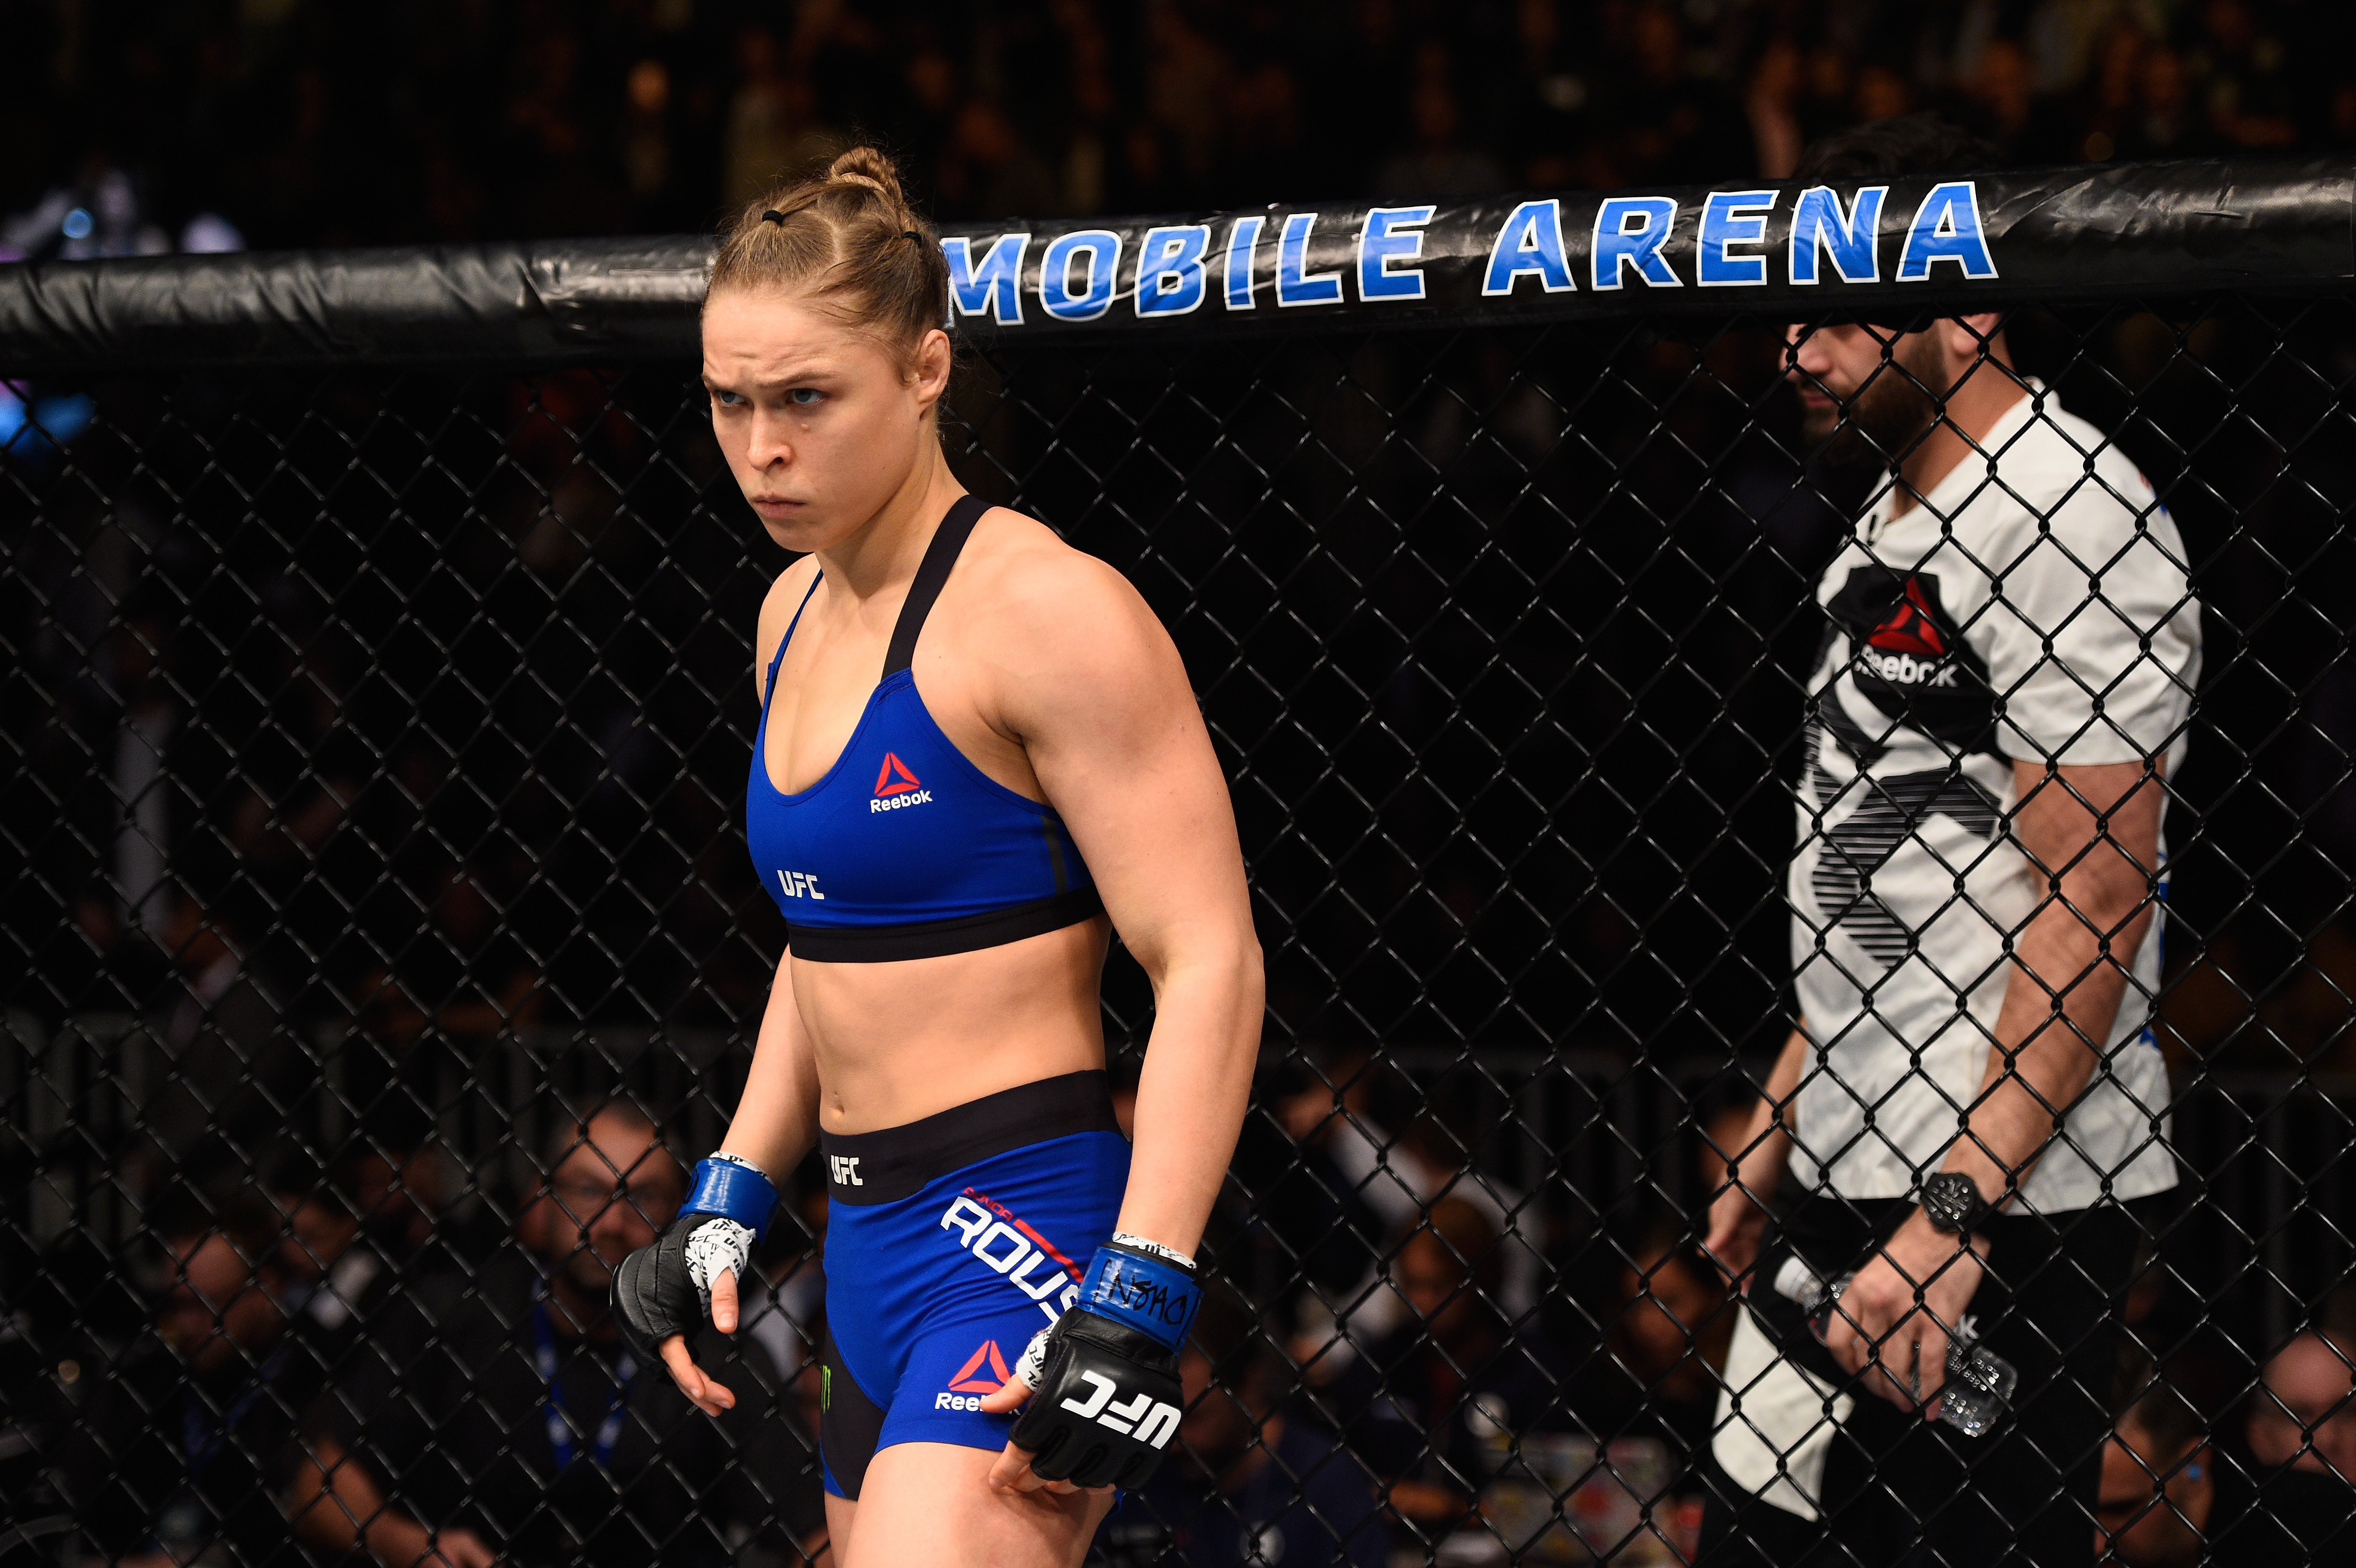 Rousey is a UFC Hall of Famer who currently competes in professional wrestling